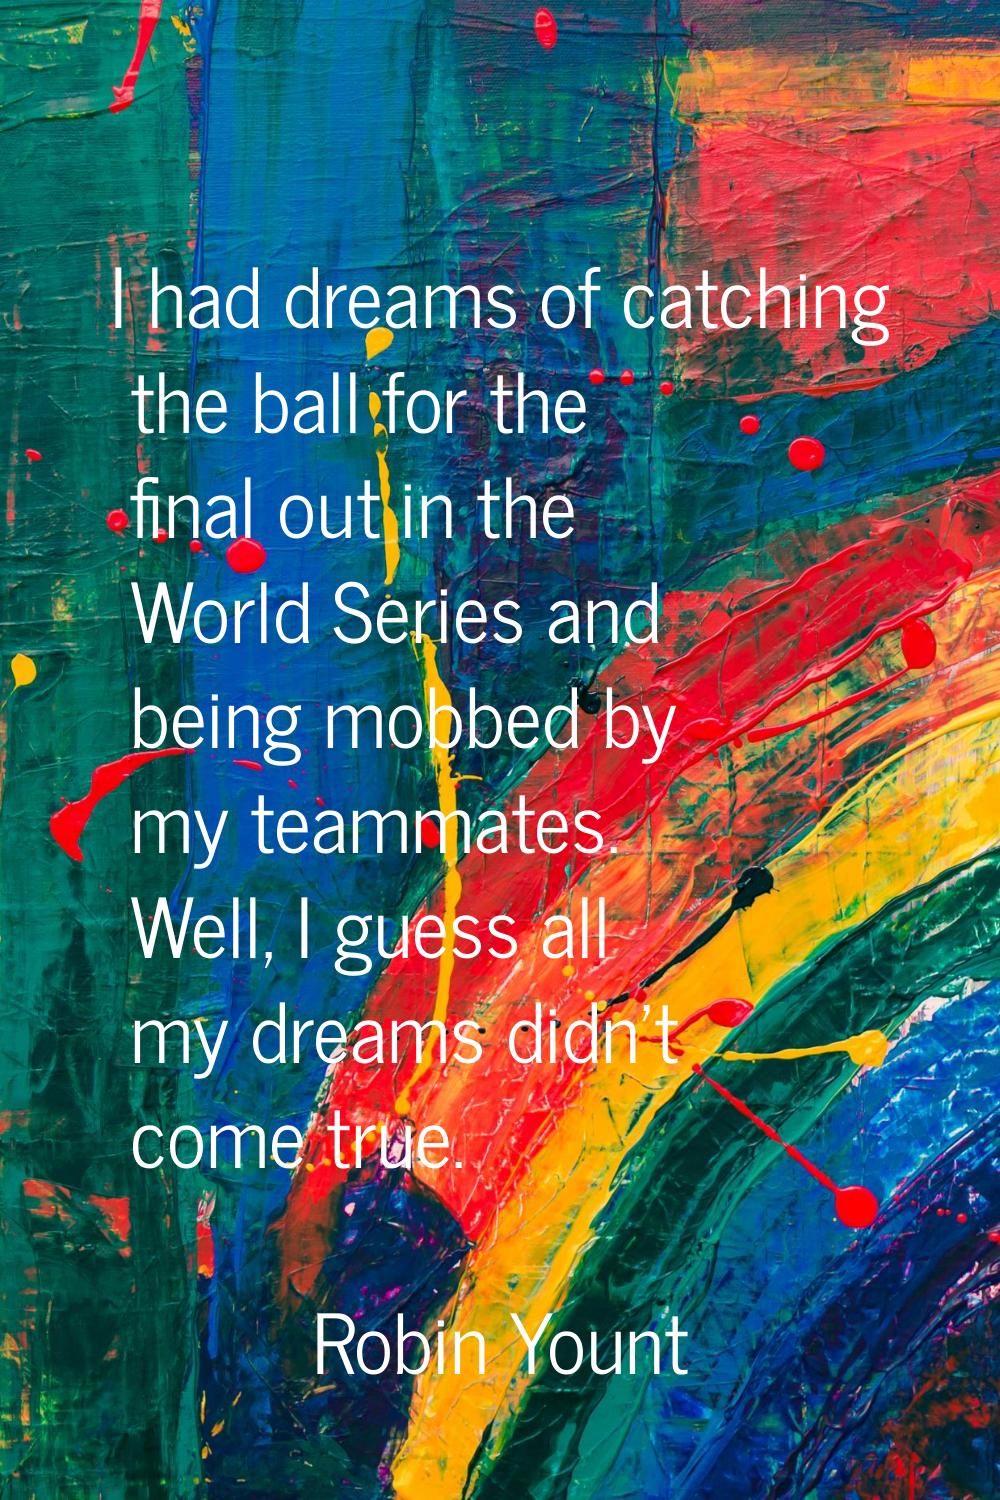 I had dreams of catching the ball for the final out in the World Series and being mobbed by my team